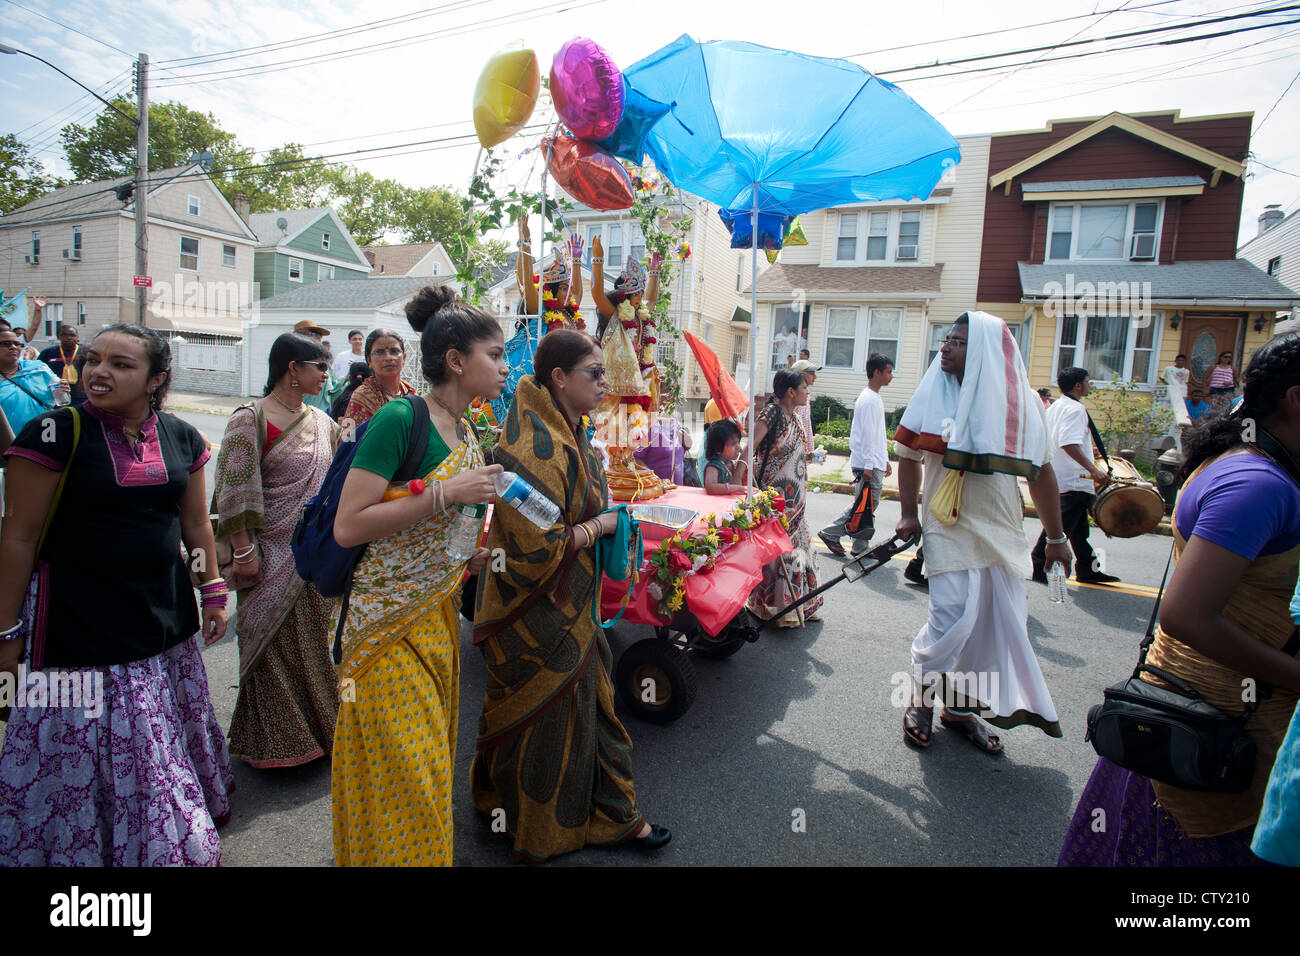 Hundreds of members of the Hare Krishna religion march in their annual Ratha Yatra parade. Stock Photo